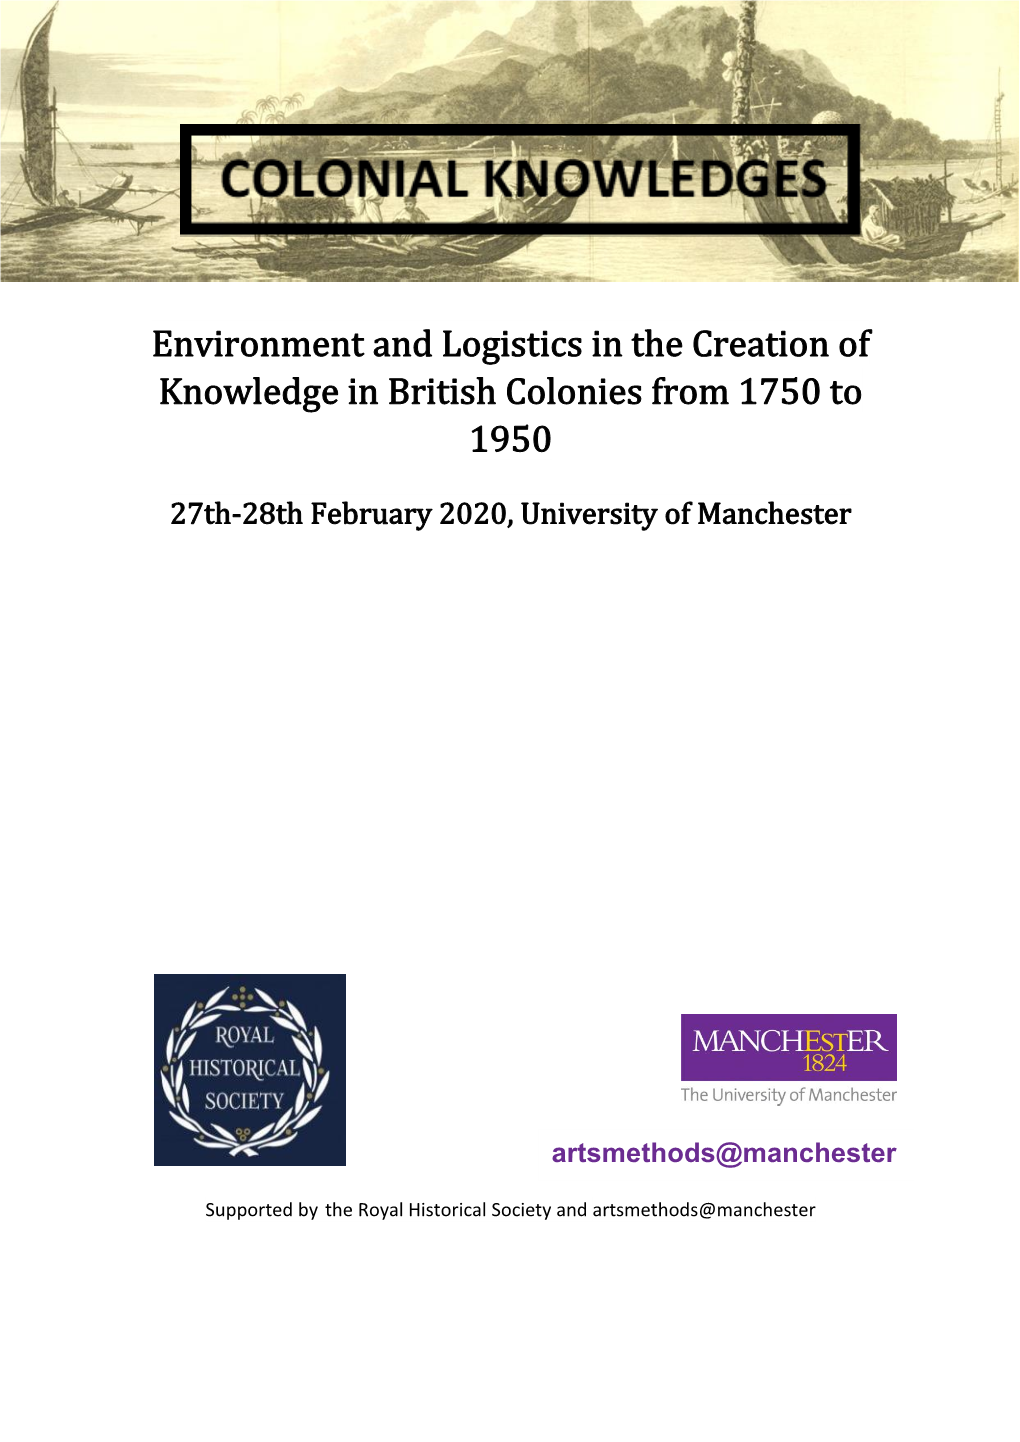 Colonial Knowledges Conference Feb 2020 Programme